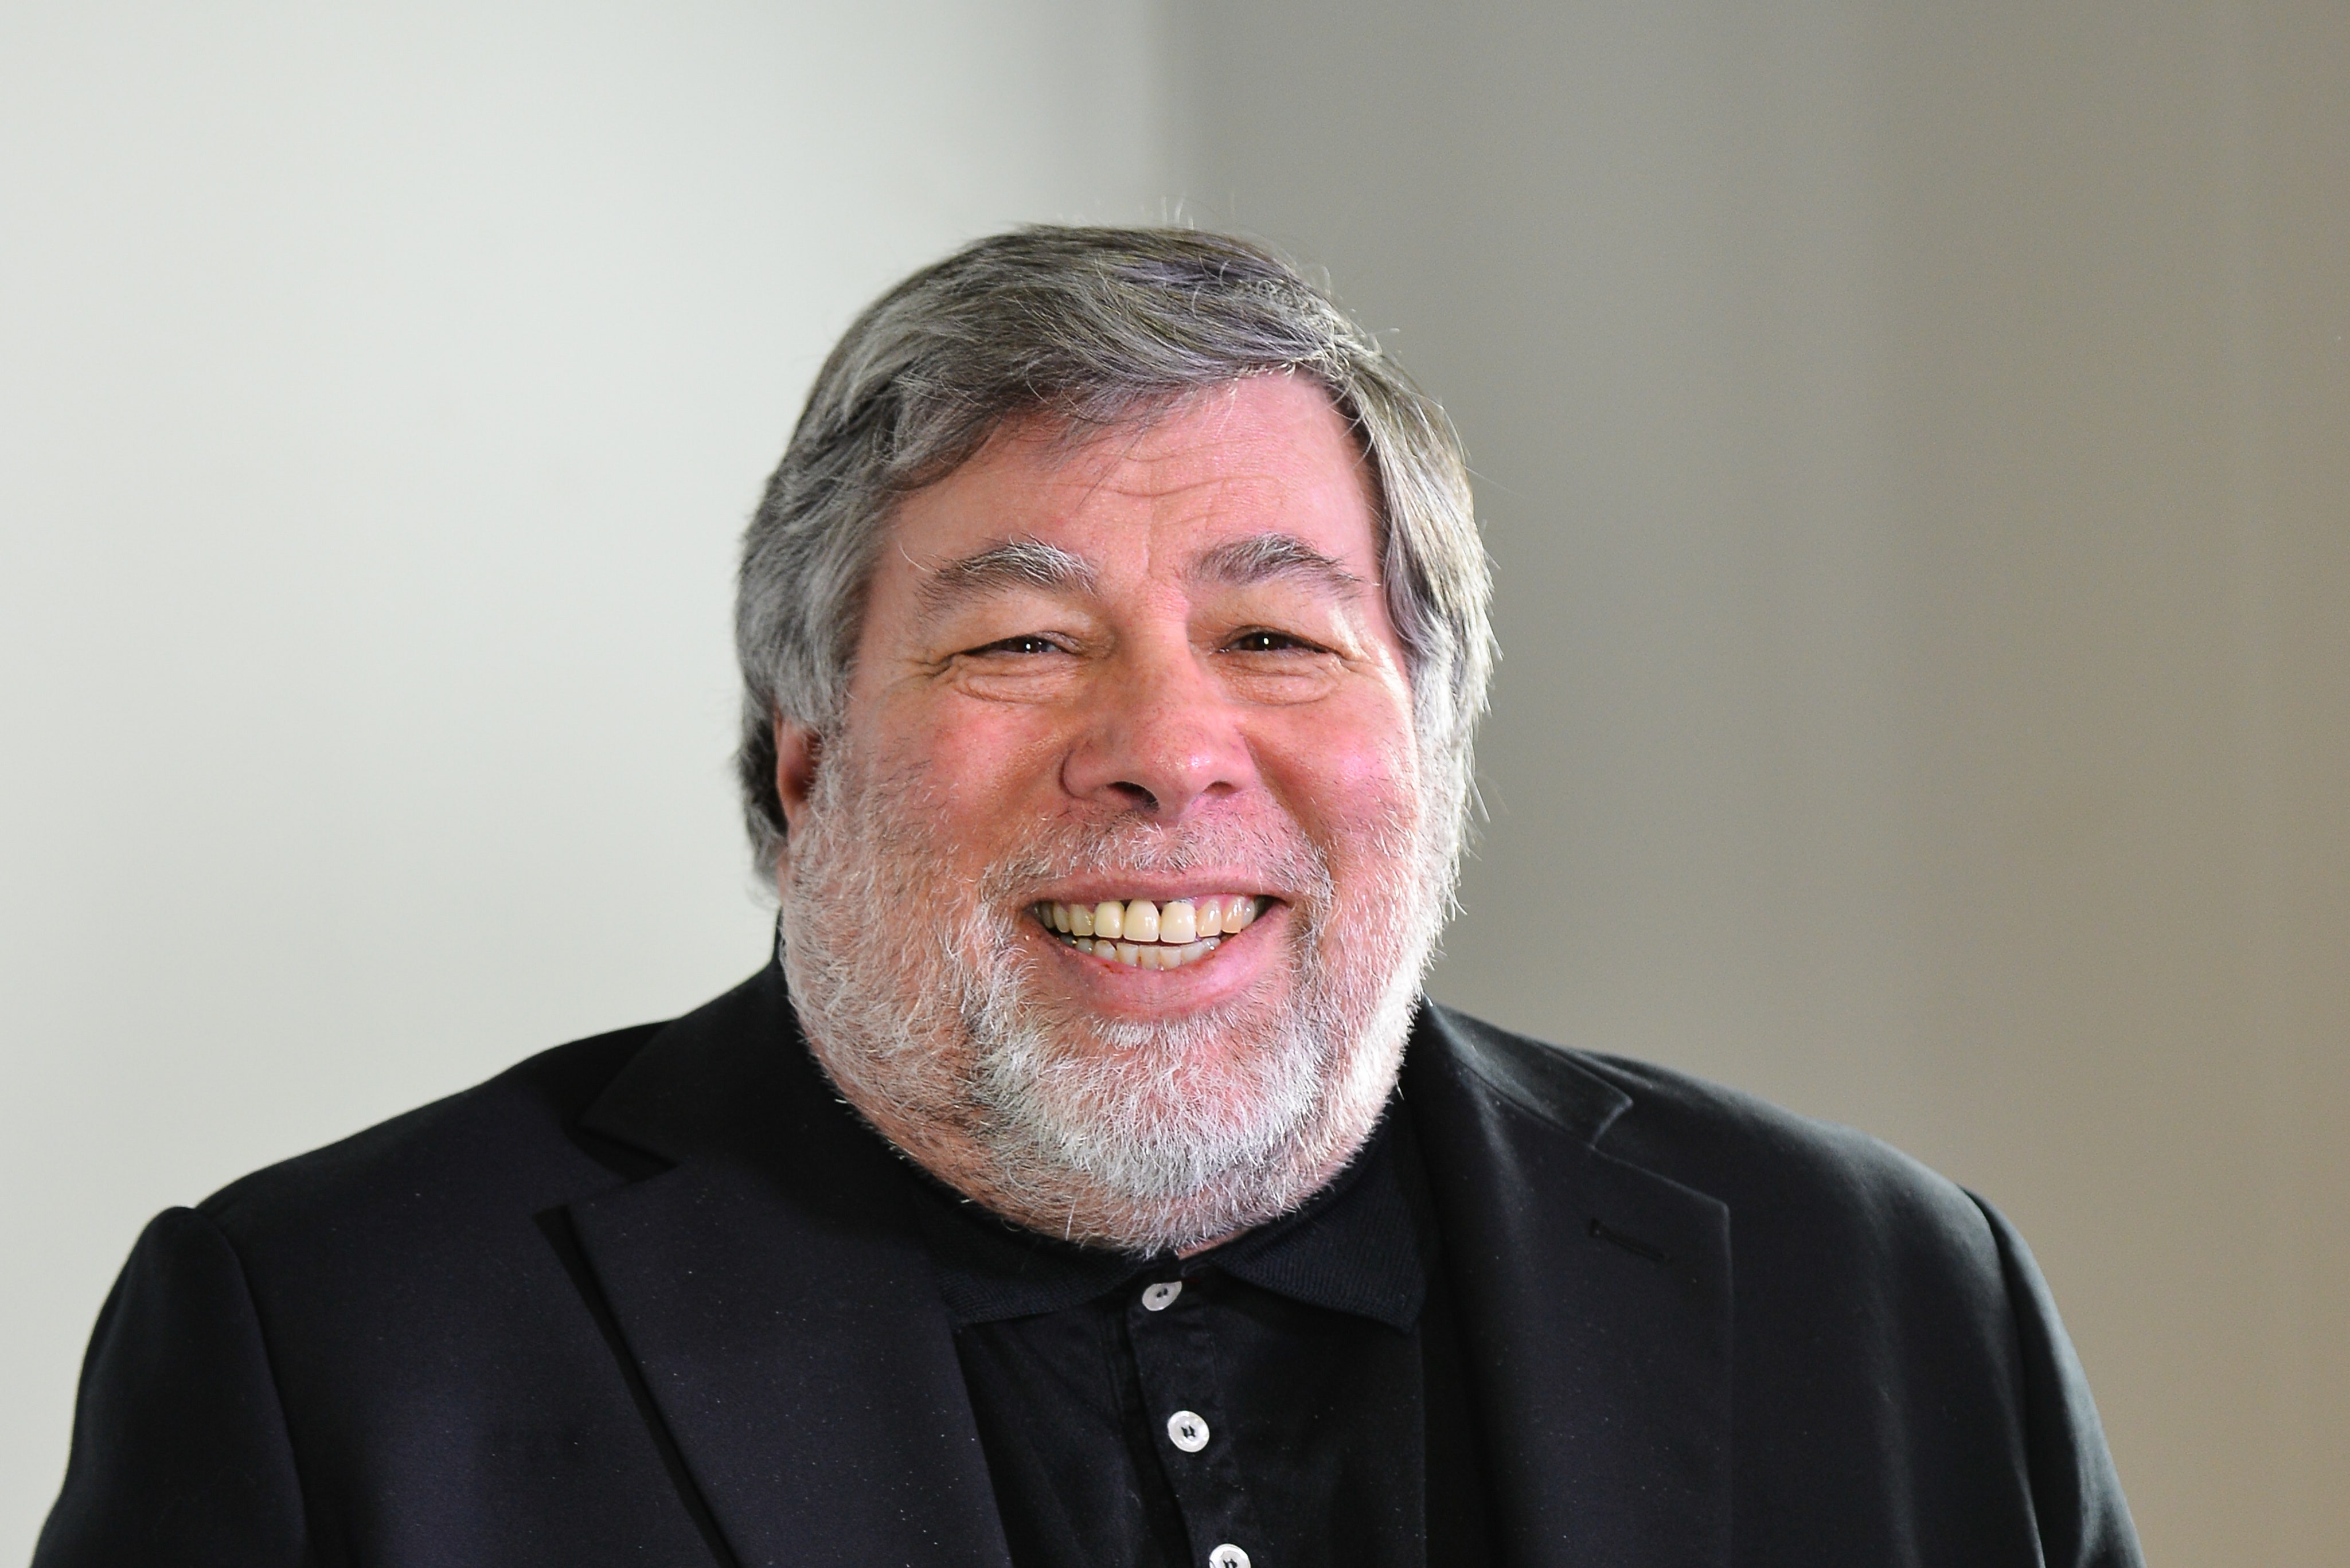 'Bitcoin Is The Most Amazing Mathematical Miracle,' Says Apple Co-Founder Steve Wozniak